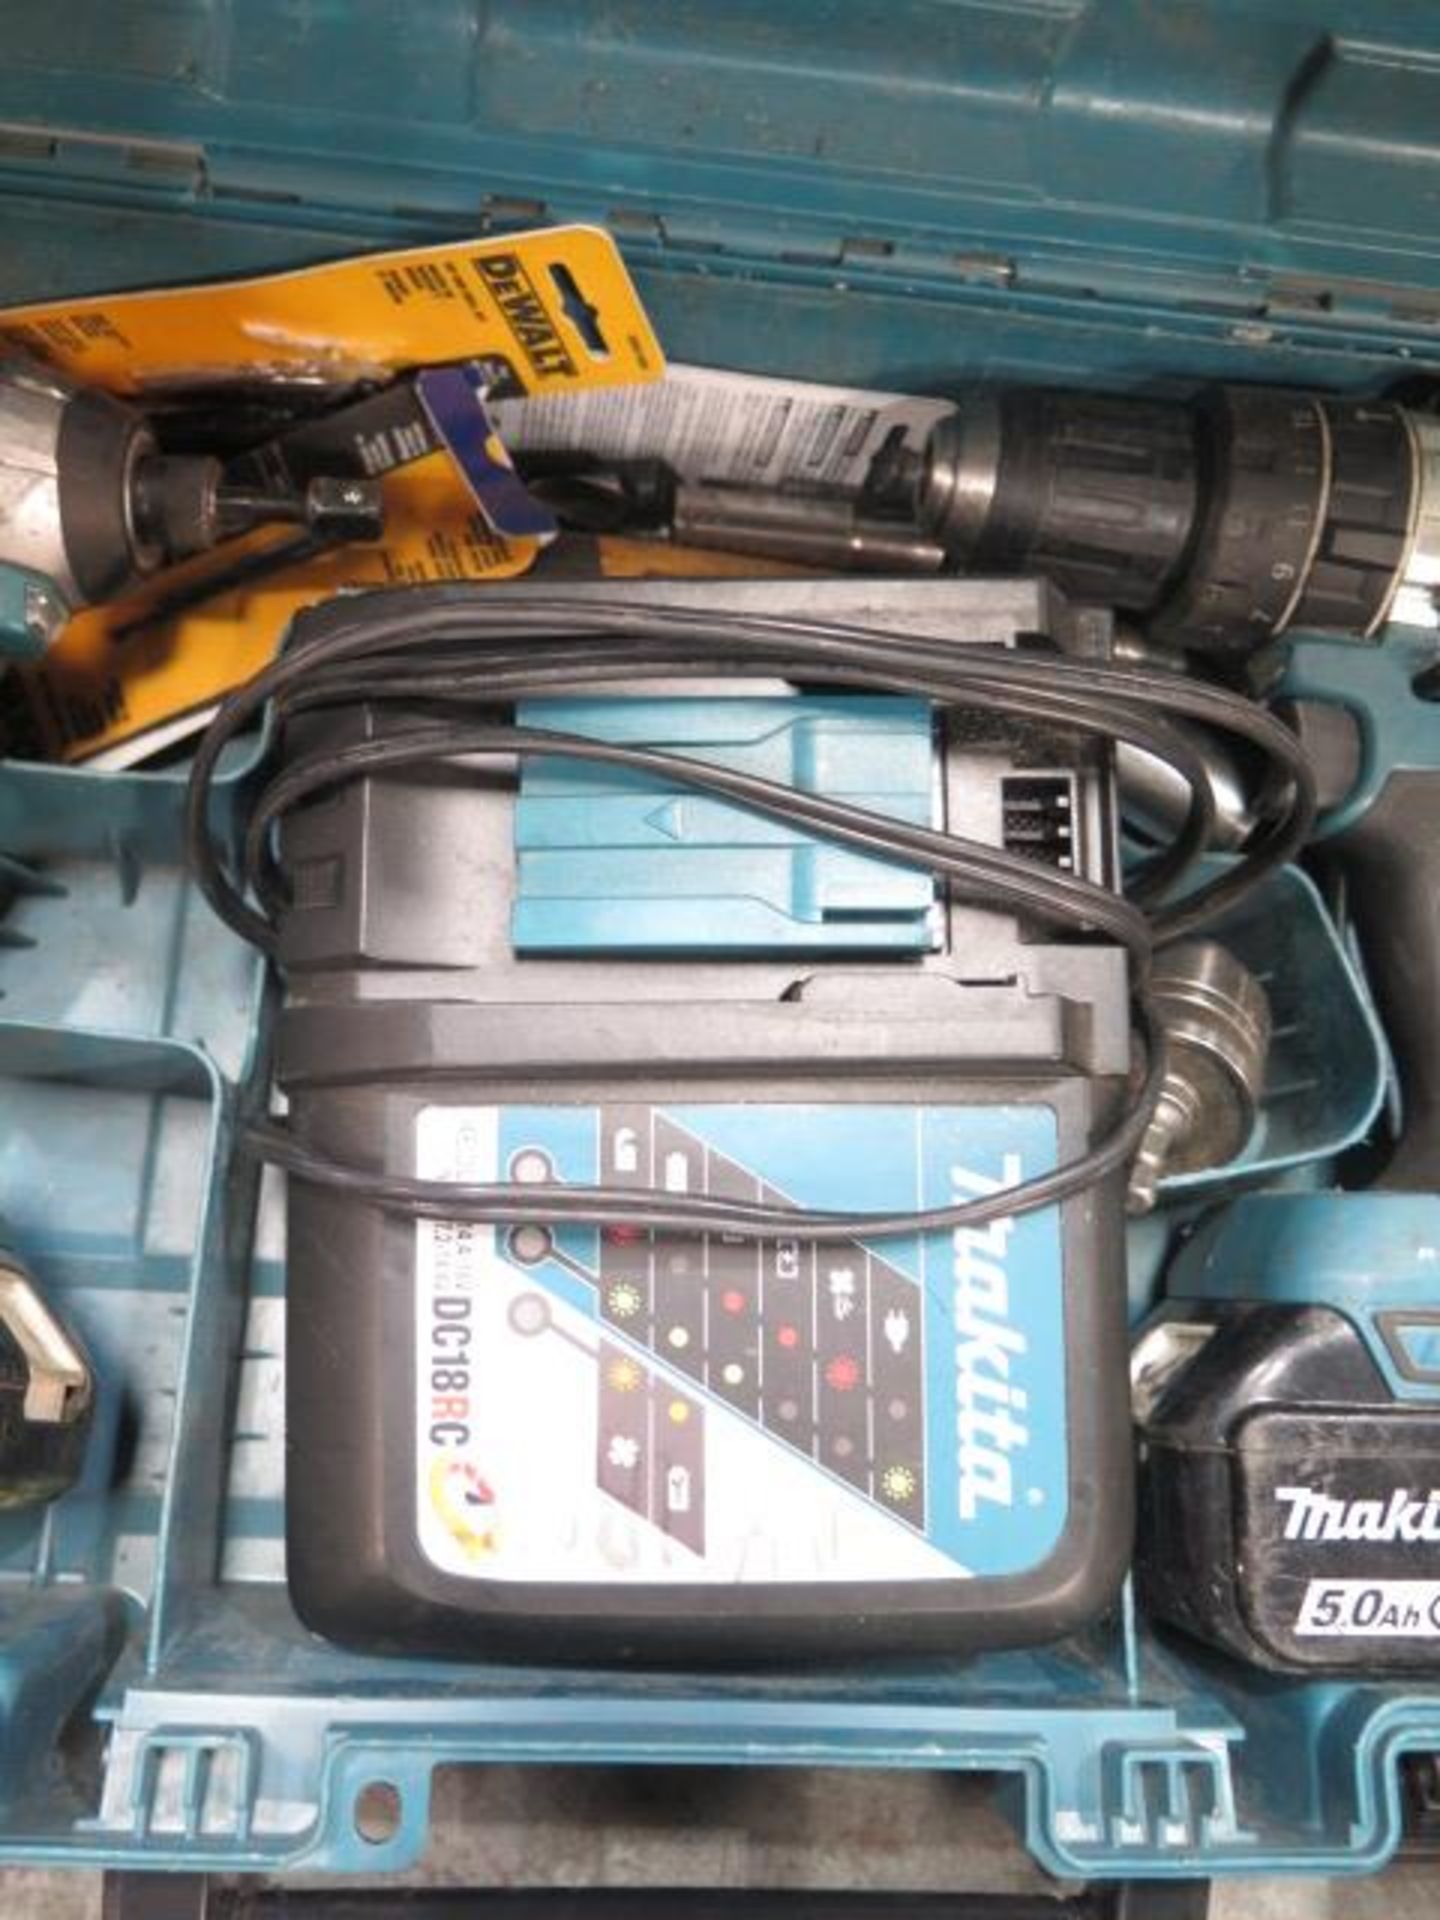 Makita 18V Cordless Drill and Nut Driver Set w/ Charger (SOLD AS-IS - NO WARRANTY) - Image 5 of 5